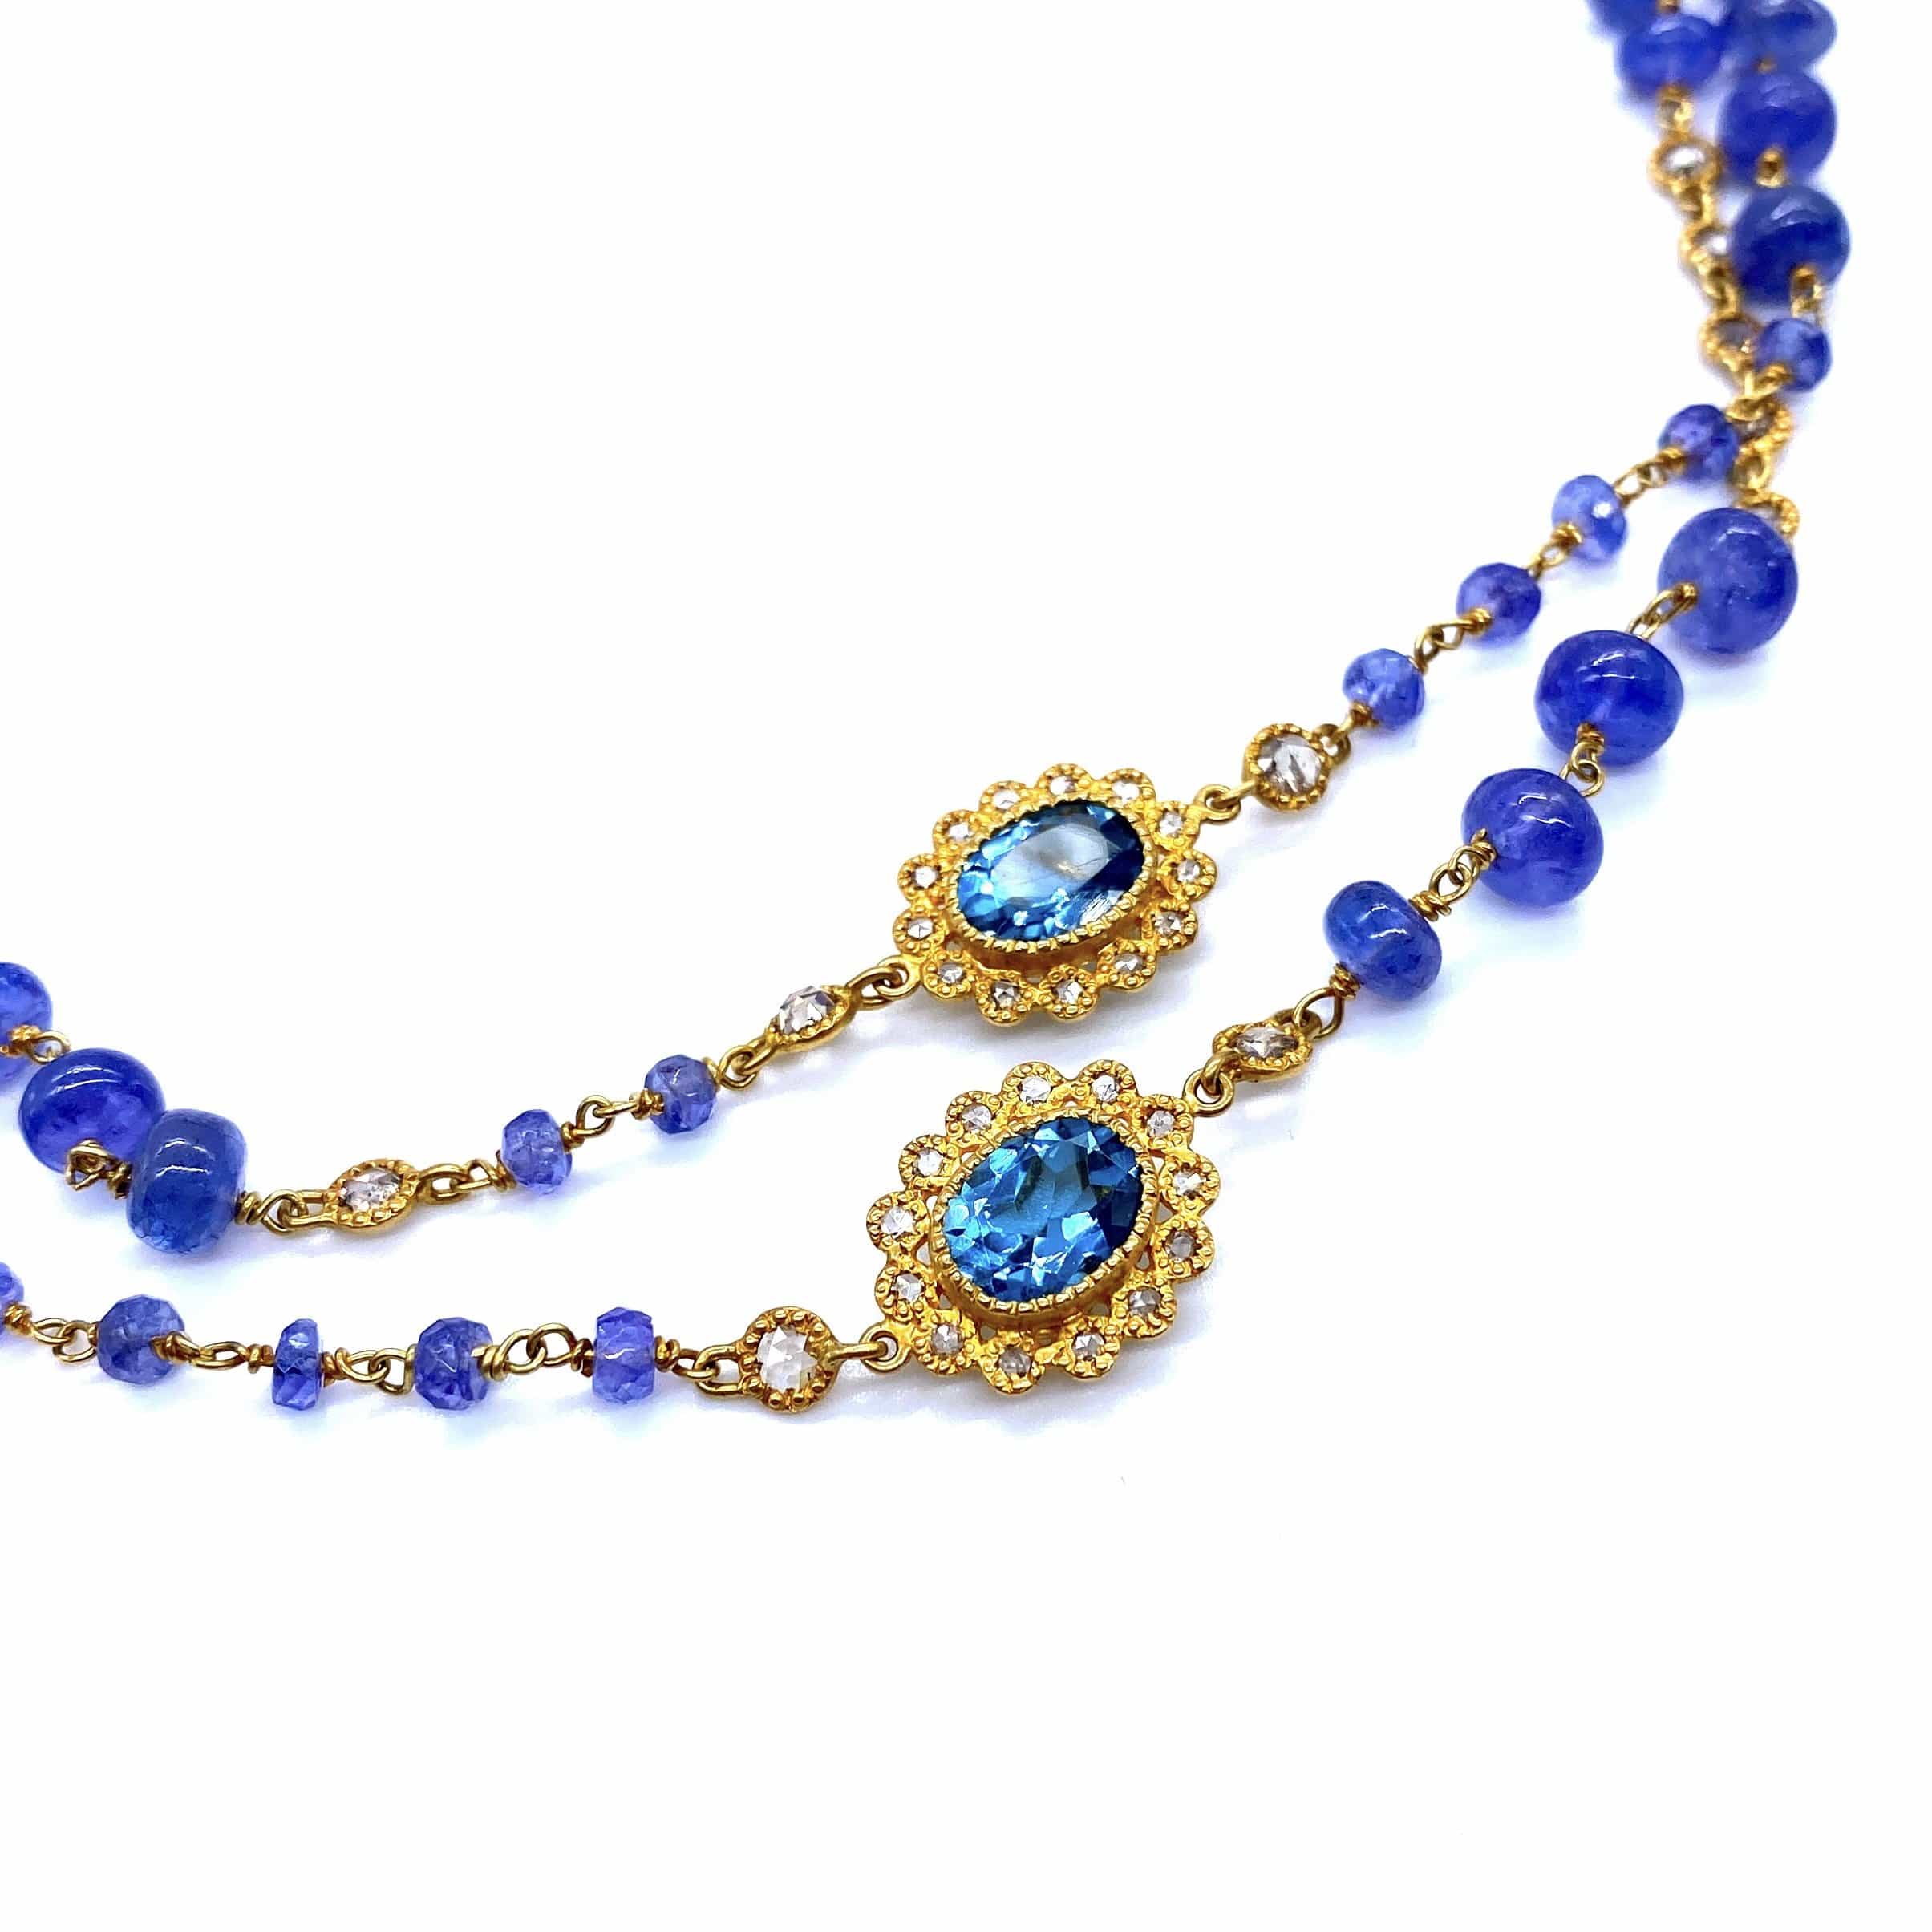 Affinity 20K Tanzanite and Blue Topaz Necklace - Coomi